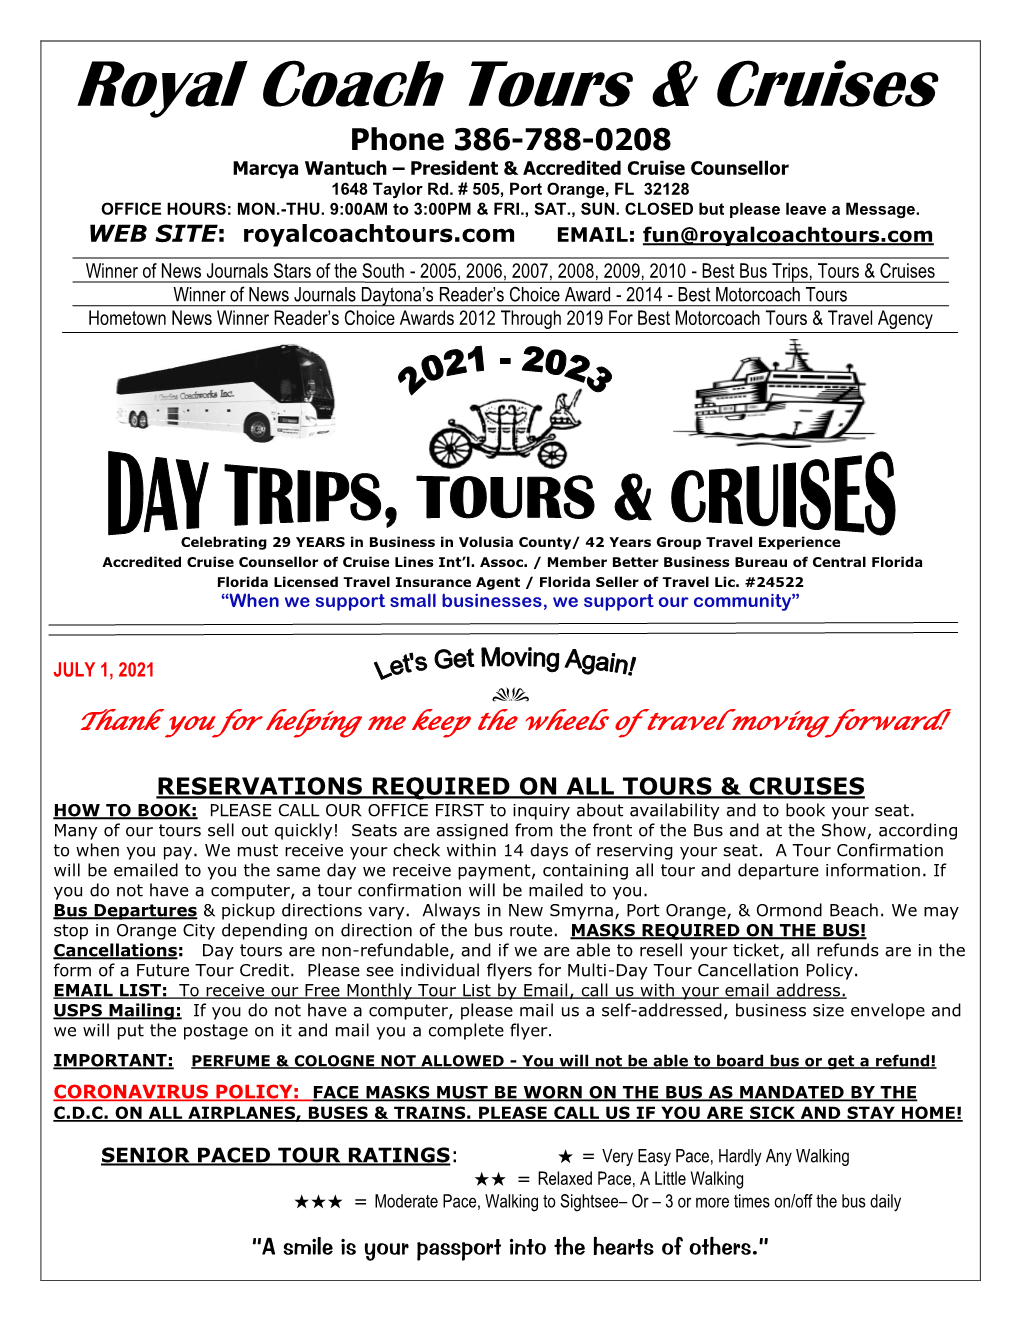 Royal Coach Tours Offers